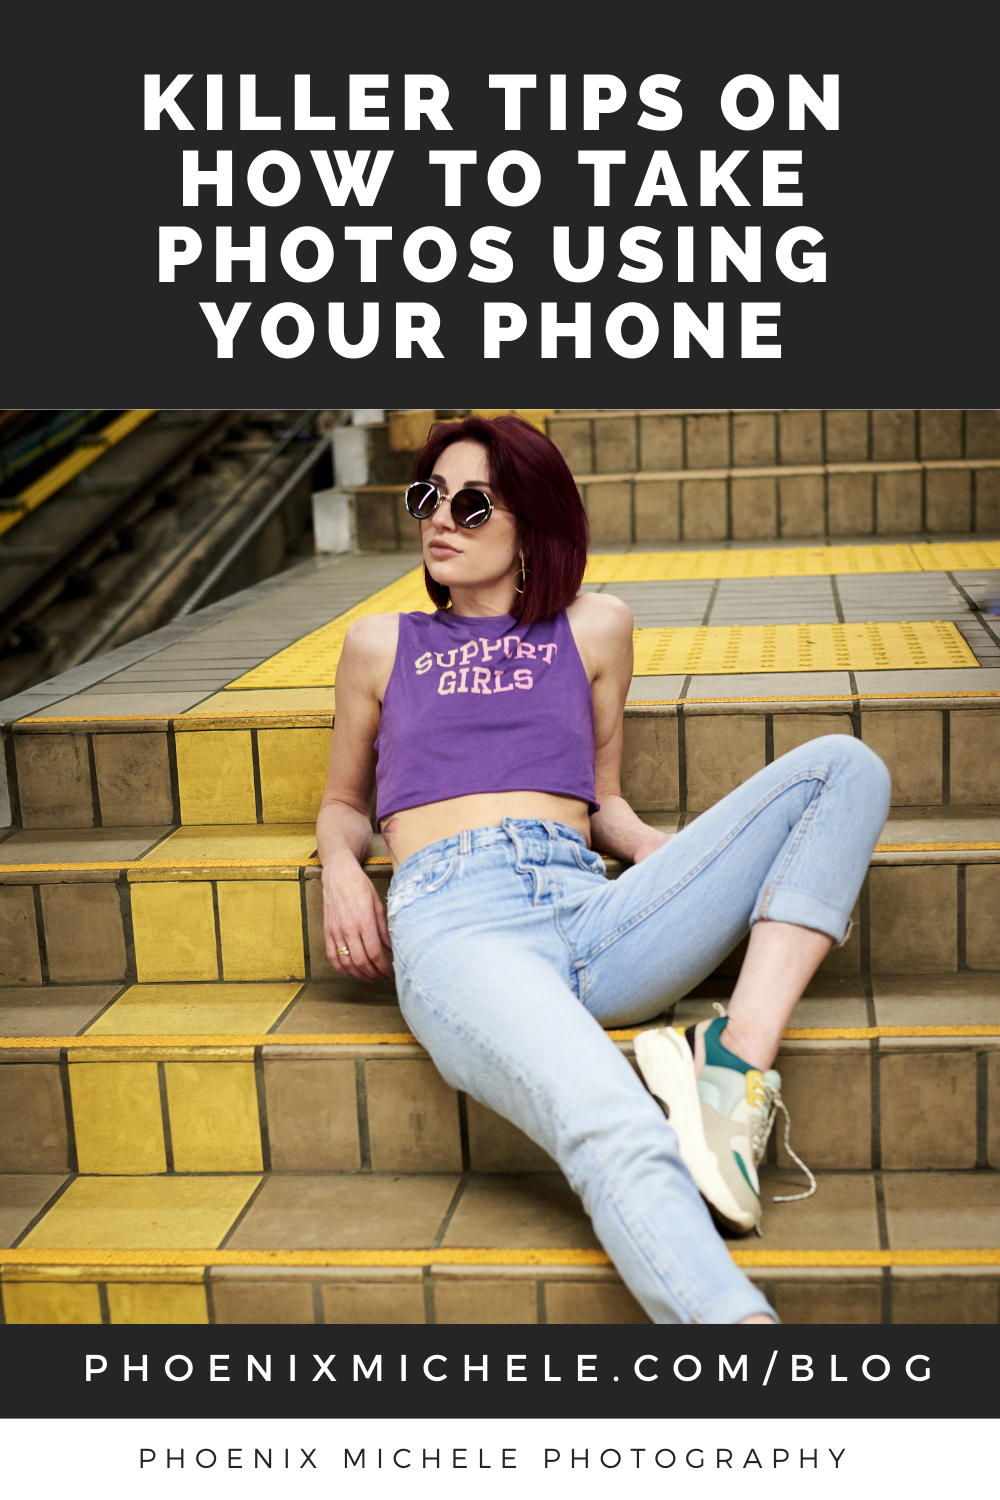 How To Take Photos Using Your Phone